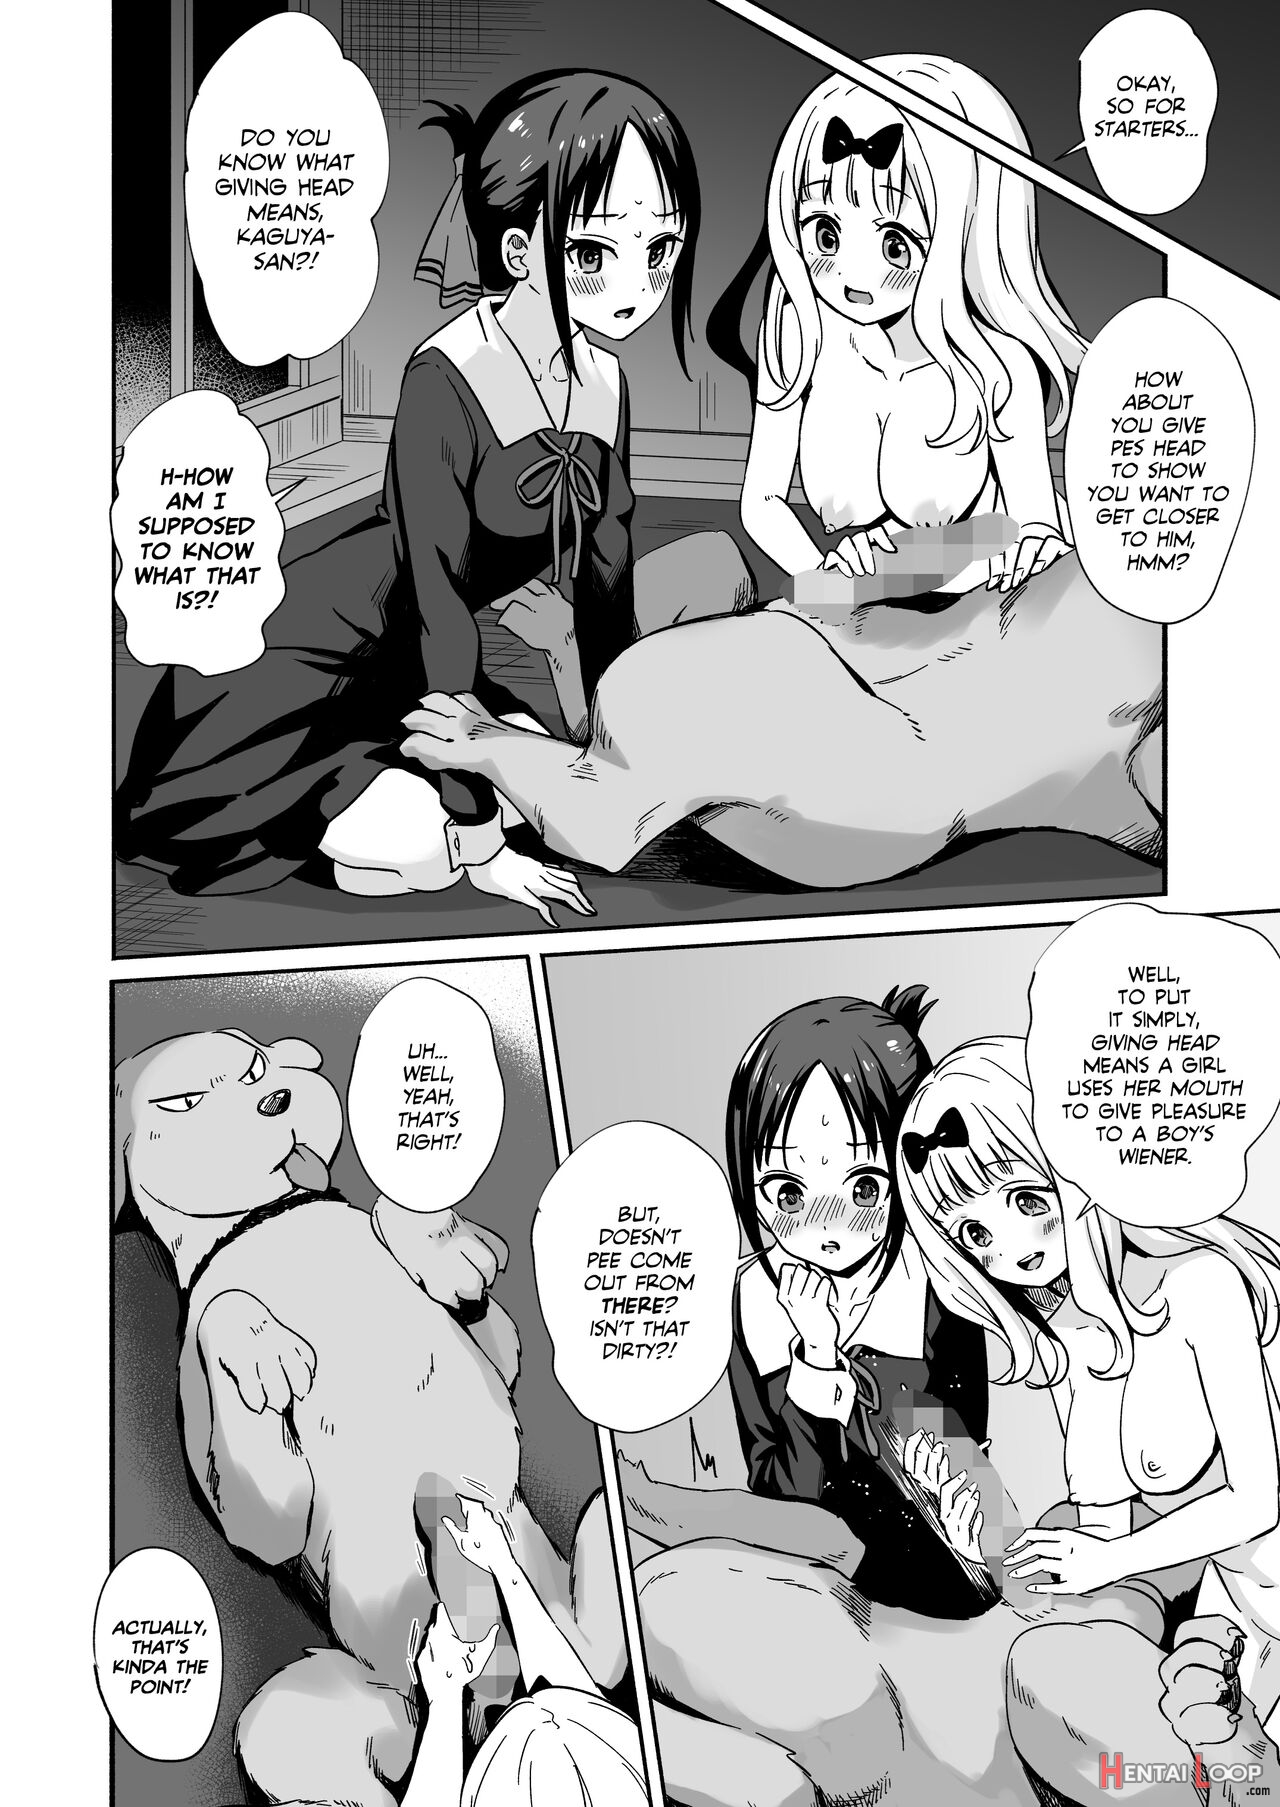 Kaguya-san Takes Care Of Pes's Sexual Urges! page 12